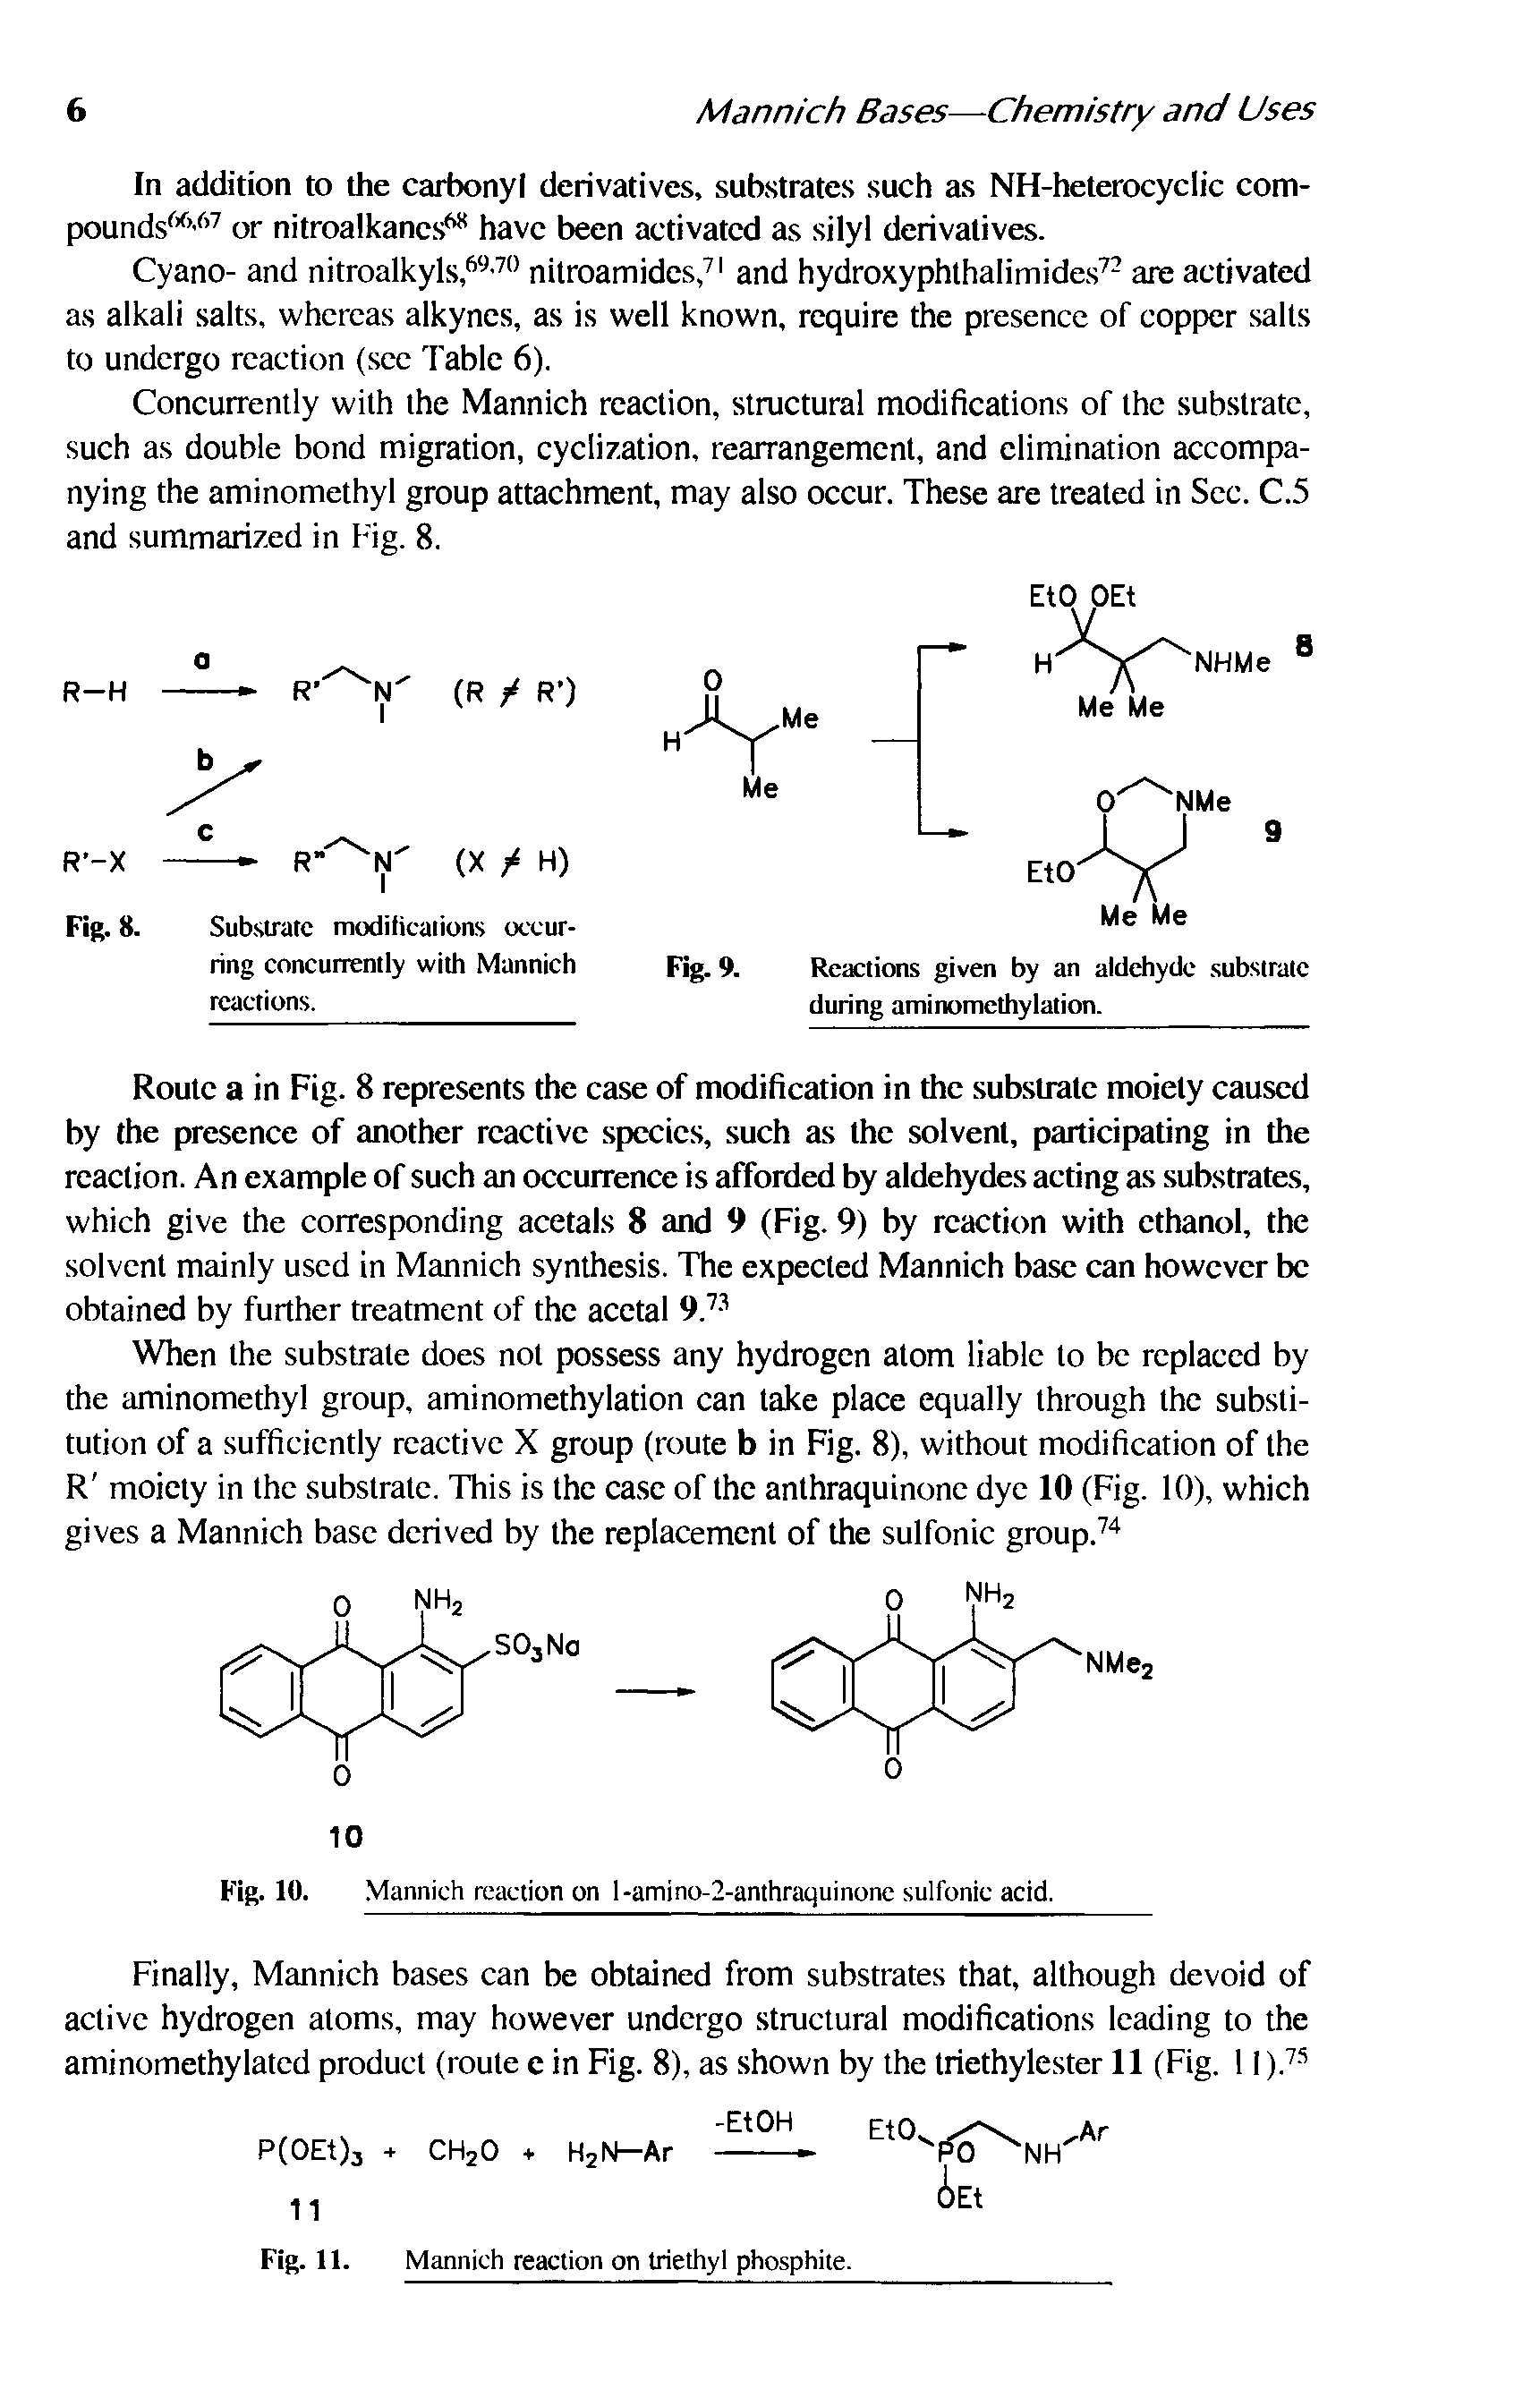 Fig. 10. Mannich reaction on l-amino-2-anthraquinone sulfonic acid.